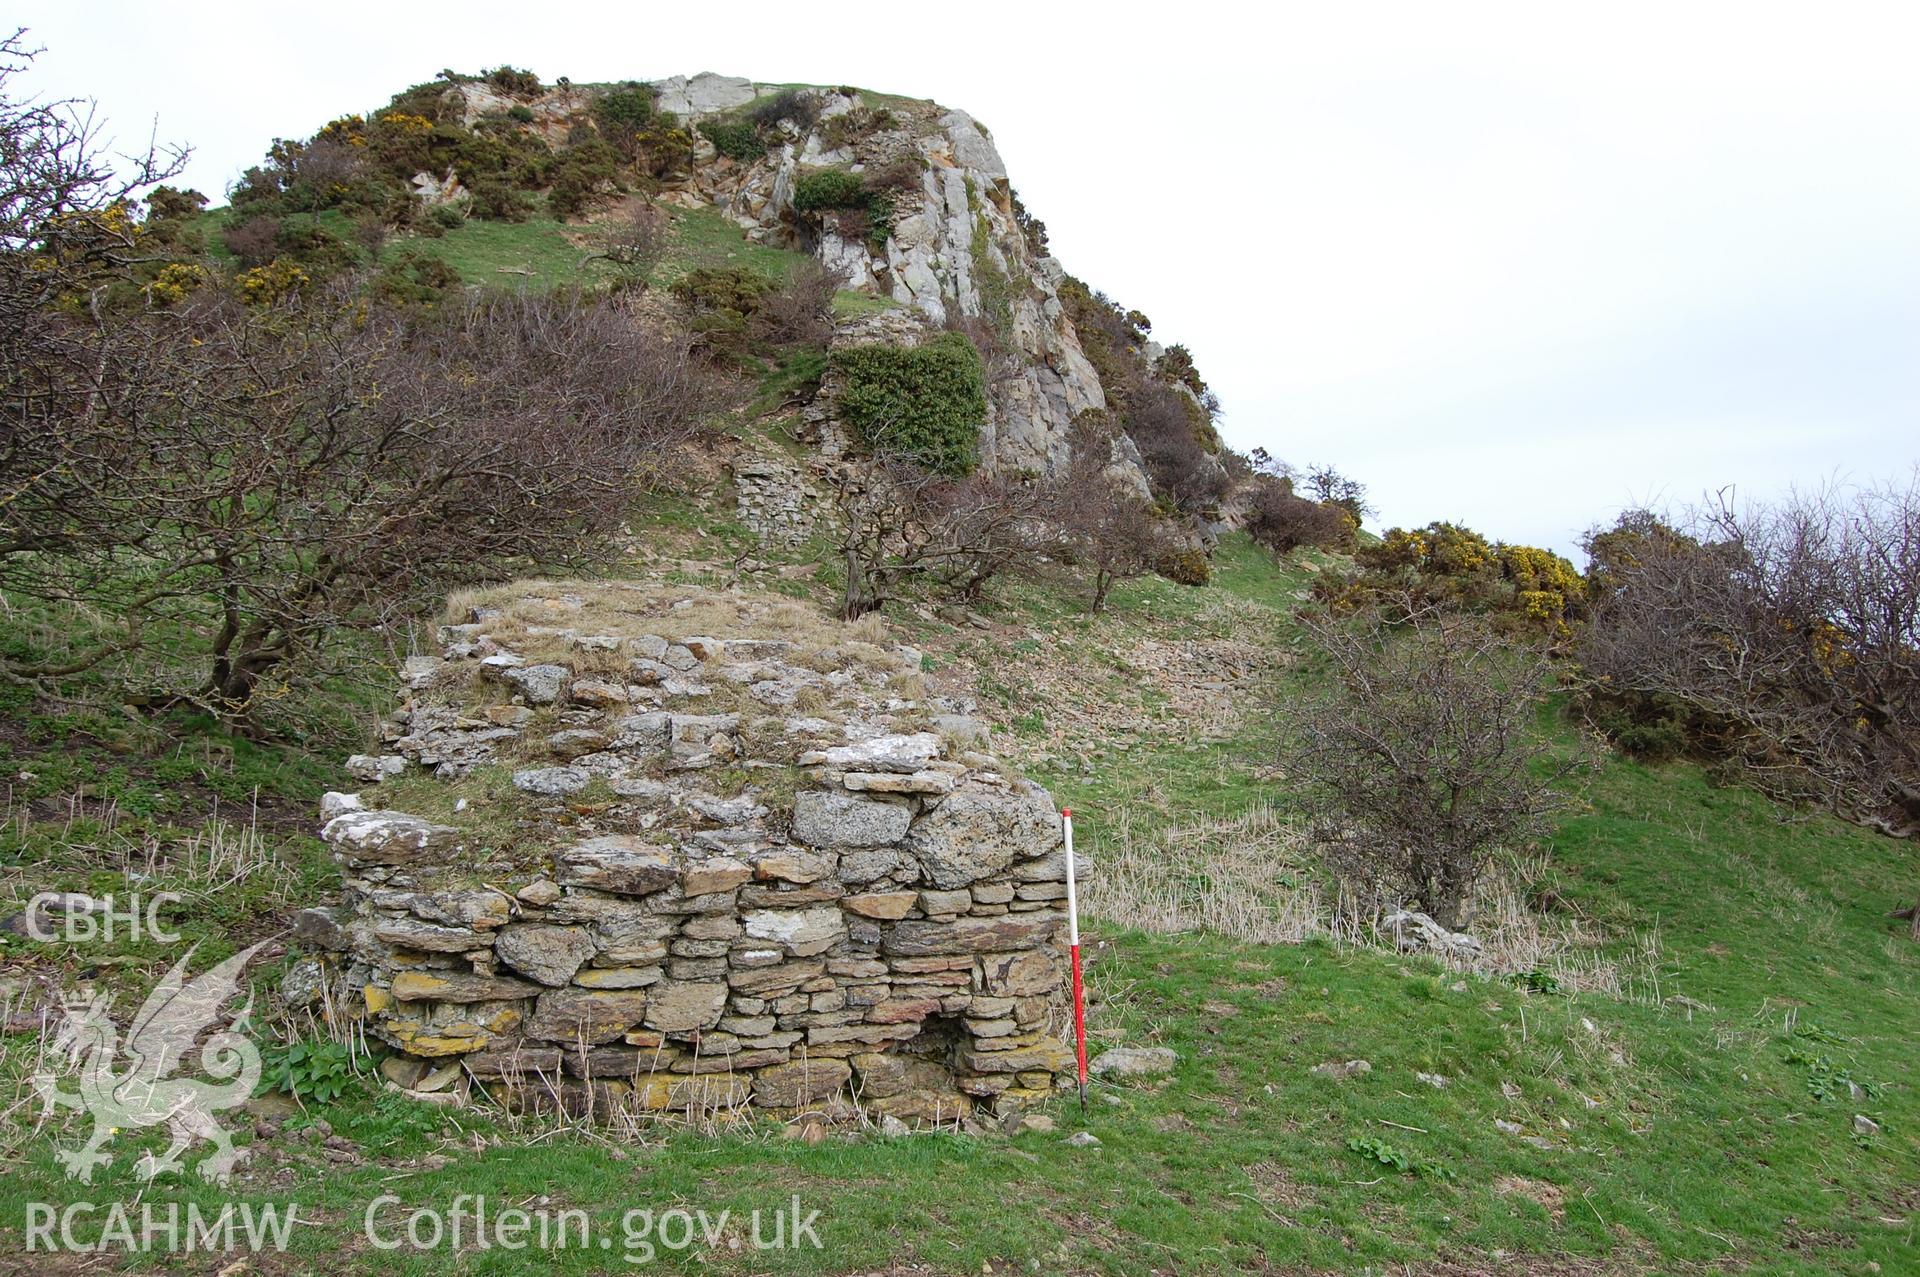 Digital photograph from an archaeological assessment of Deganwy Castle, carried out by Gwynedd Archaeological Trust, 2009. 'Fallen' masonry at South gate.